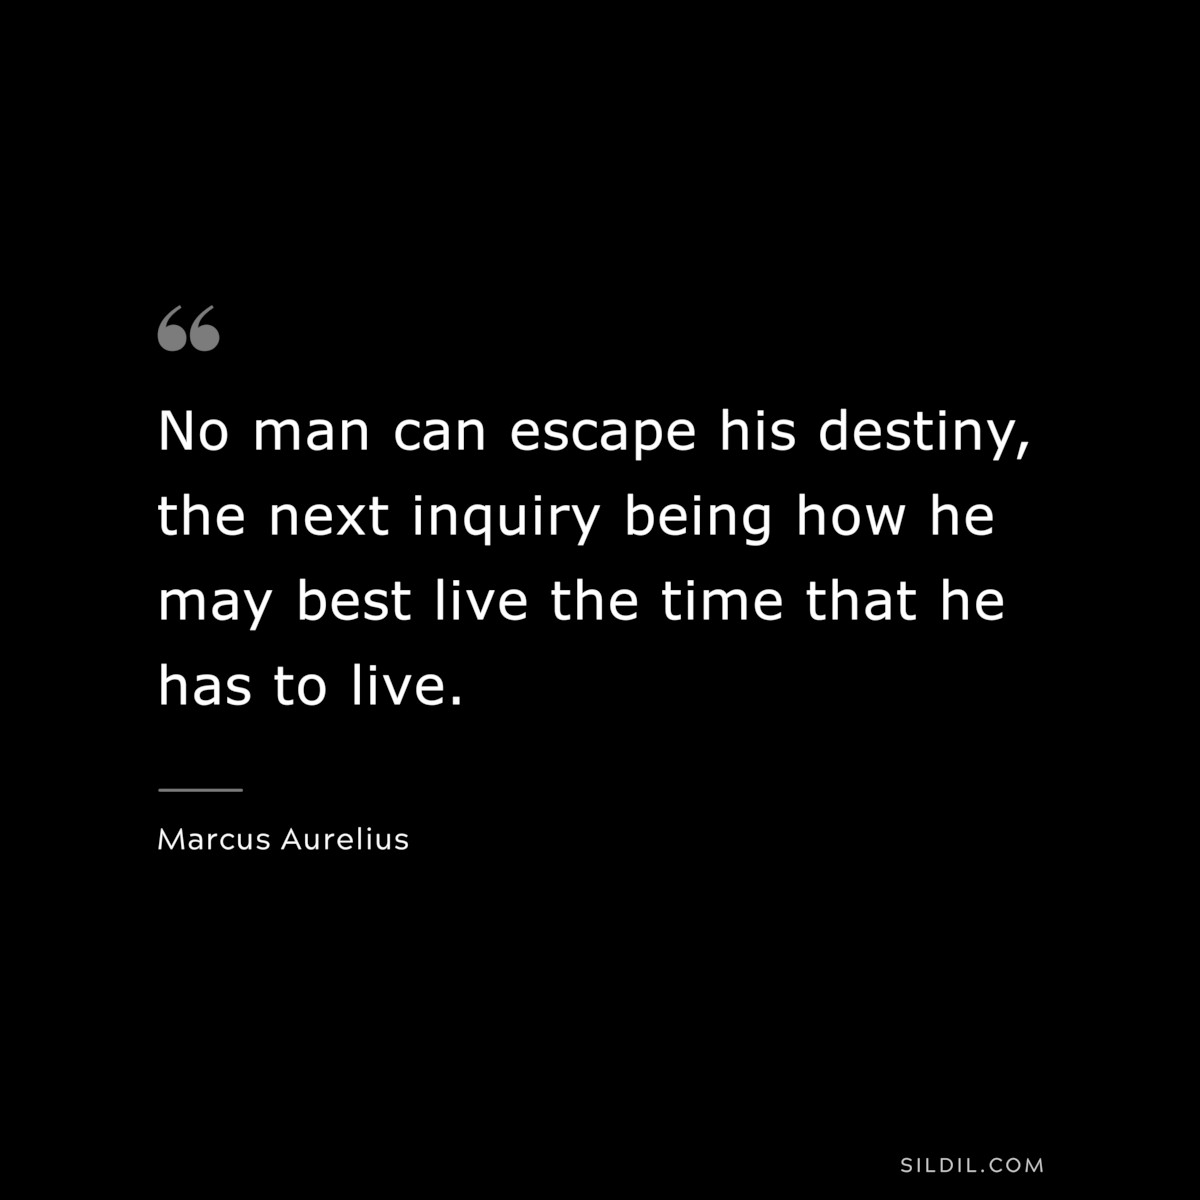 No man can escape his destiny, the next inquiry being how he may best live the time that he has to live. ― Marcus Aurelius